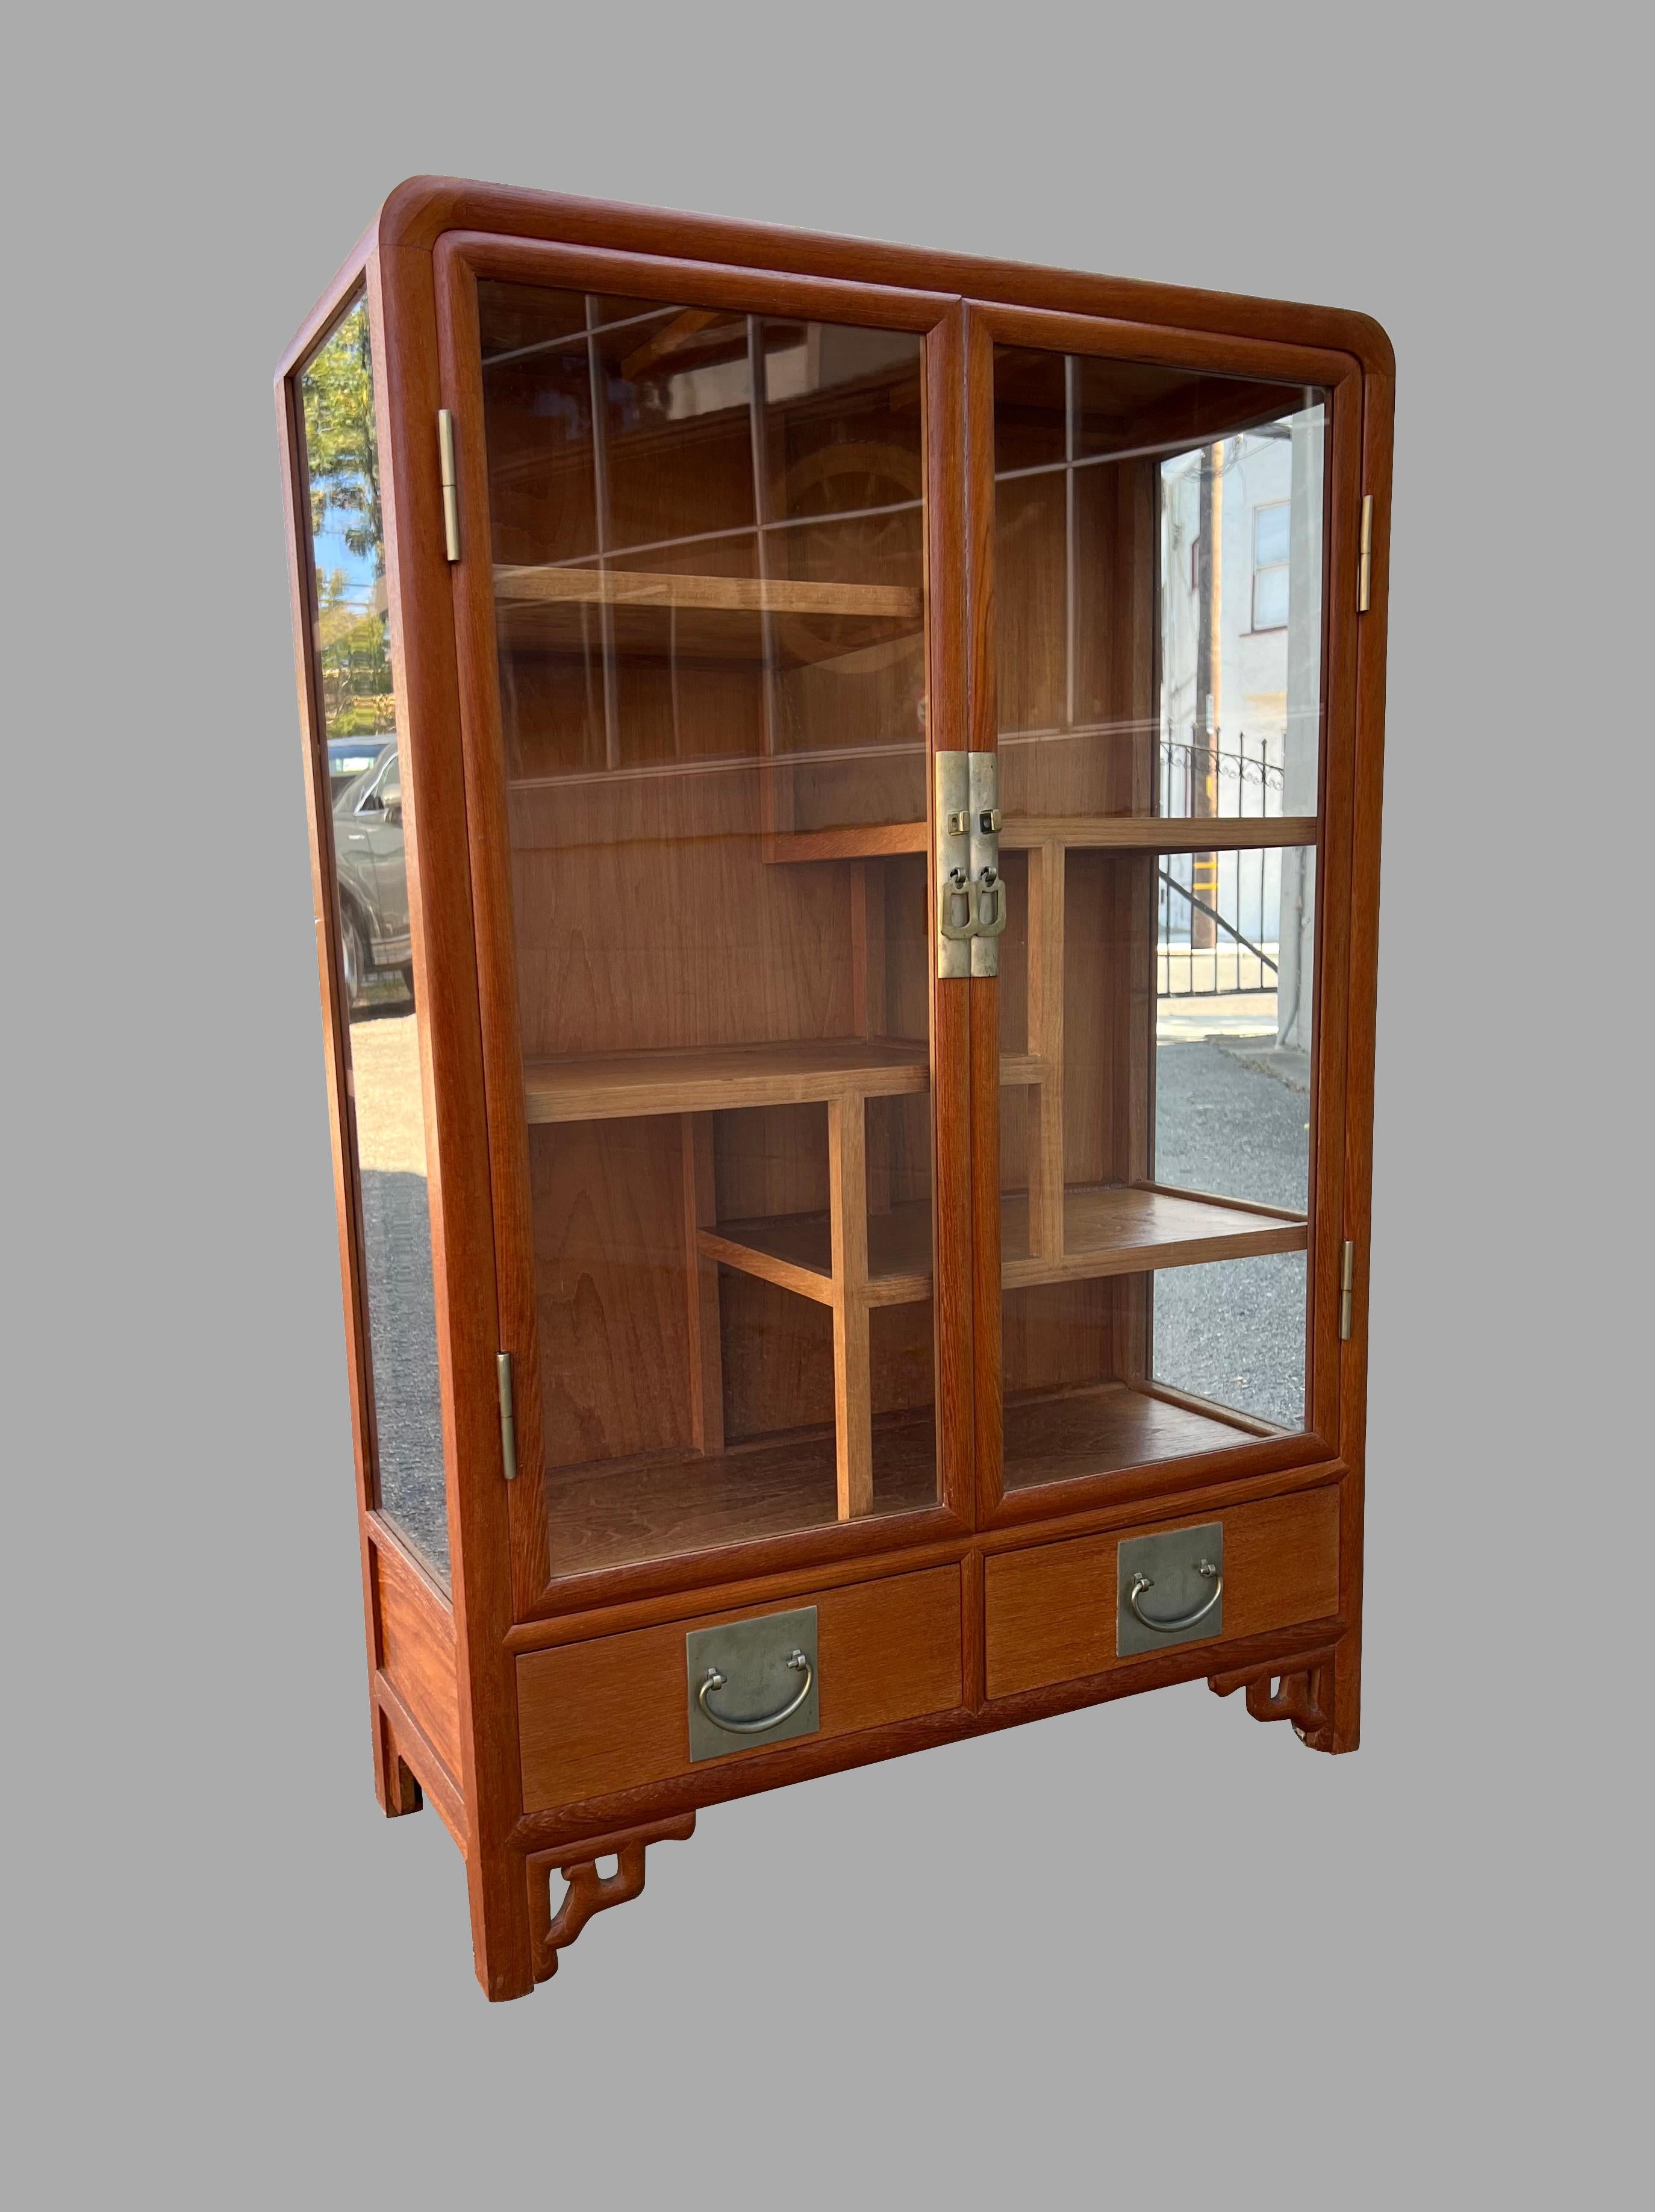 A small scale Chinese teak display cabinet of compact proportions, the glazed double doors over 2 short  dovetailed drawers resting on Asian style open bracket feet. Retains its original white brass hardware. Lock not present. Circa 1930-1950.